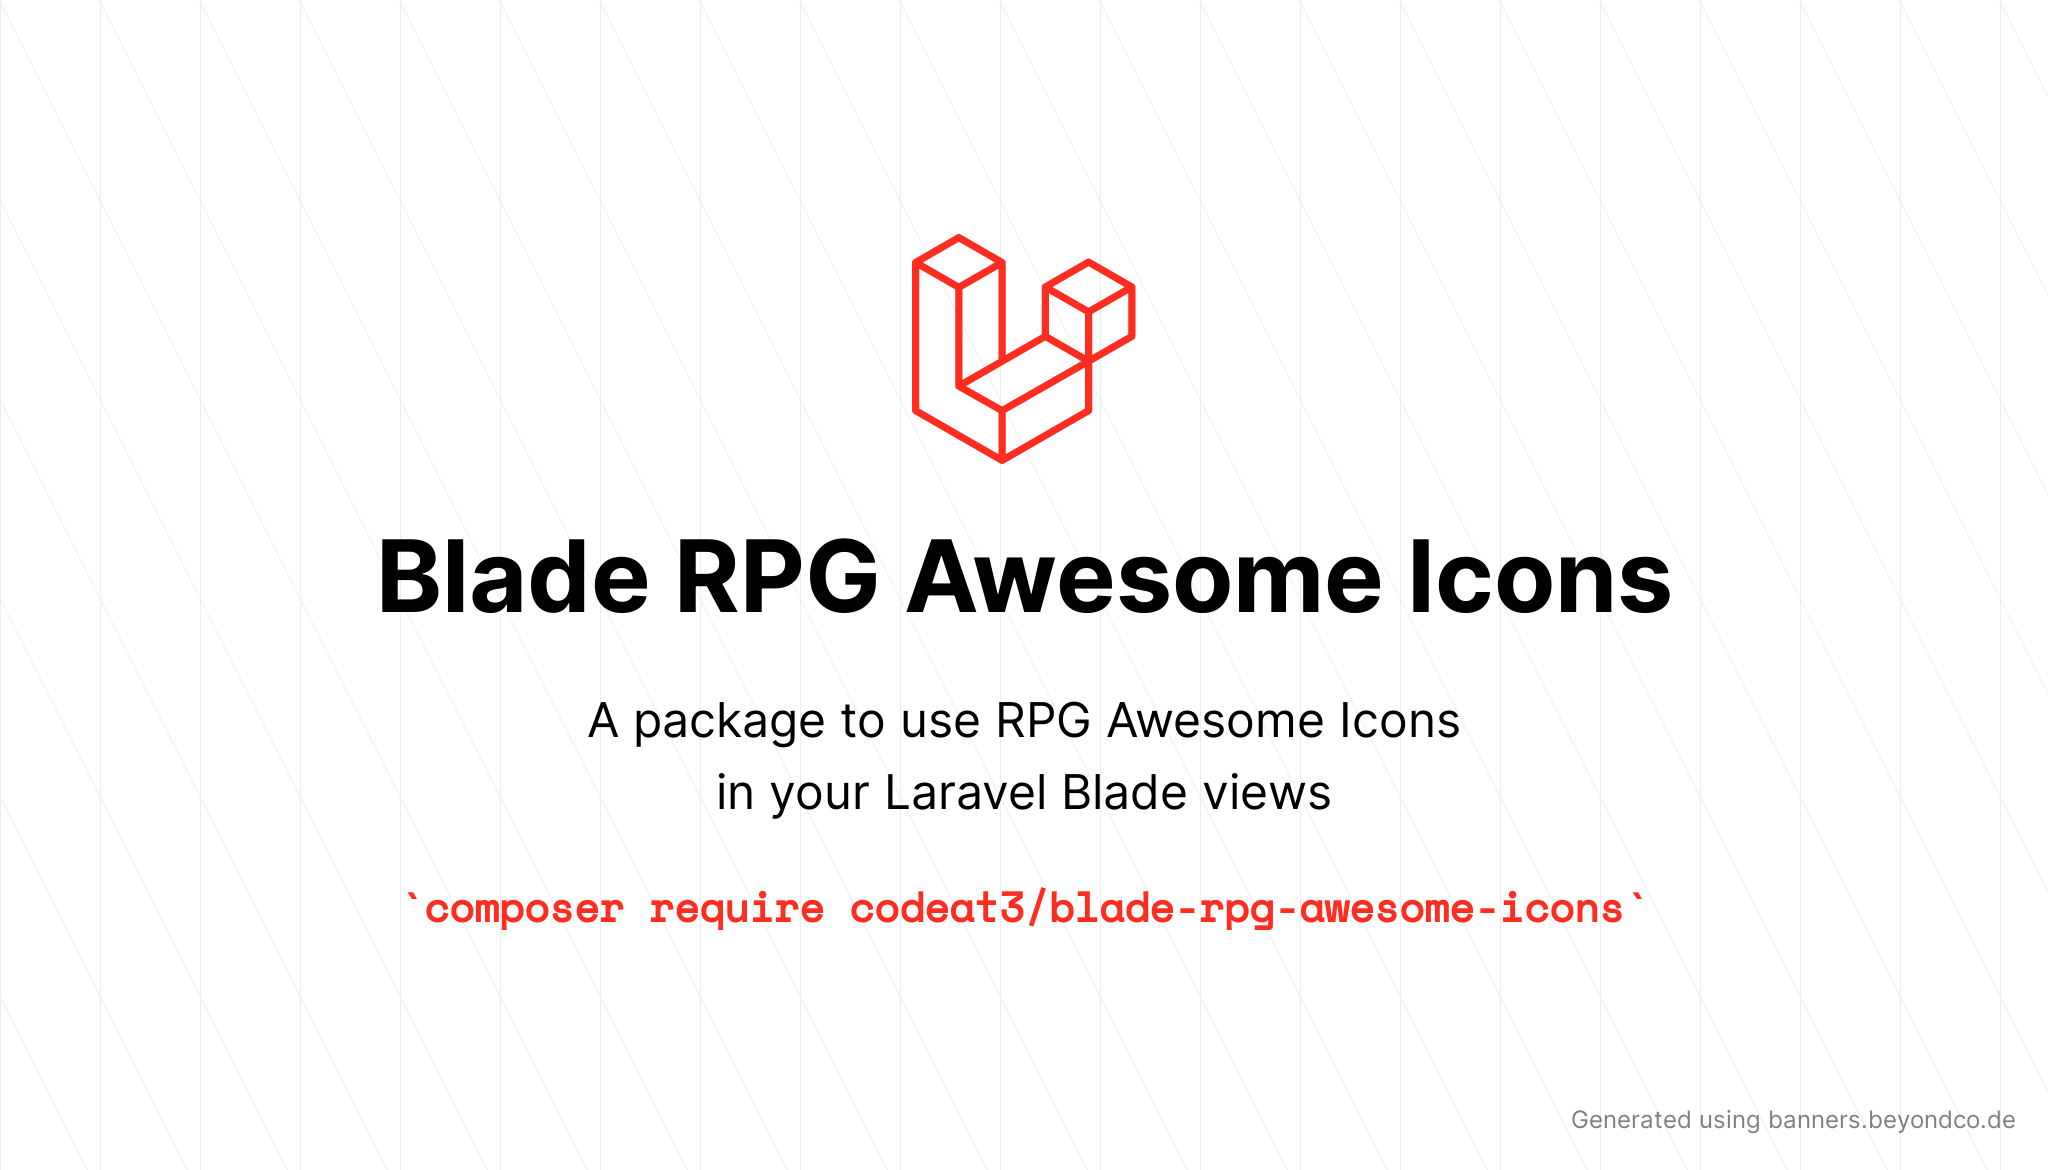 socialcard-blade-rpg-awesome-icons.png